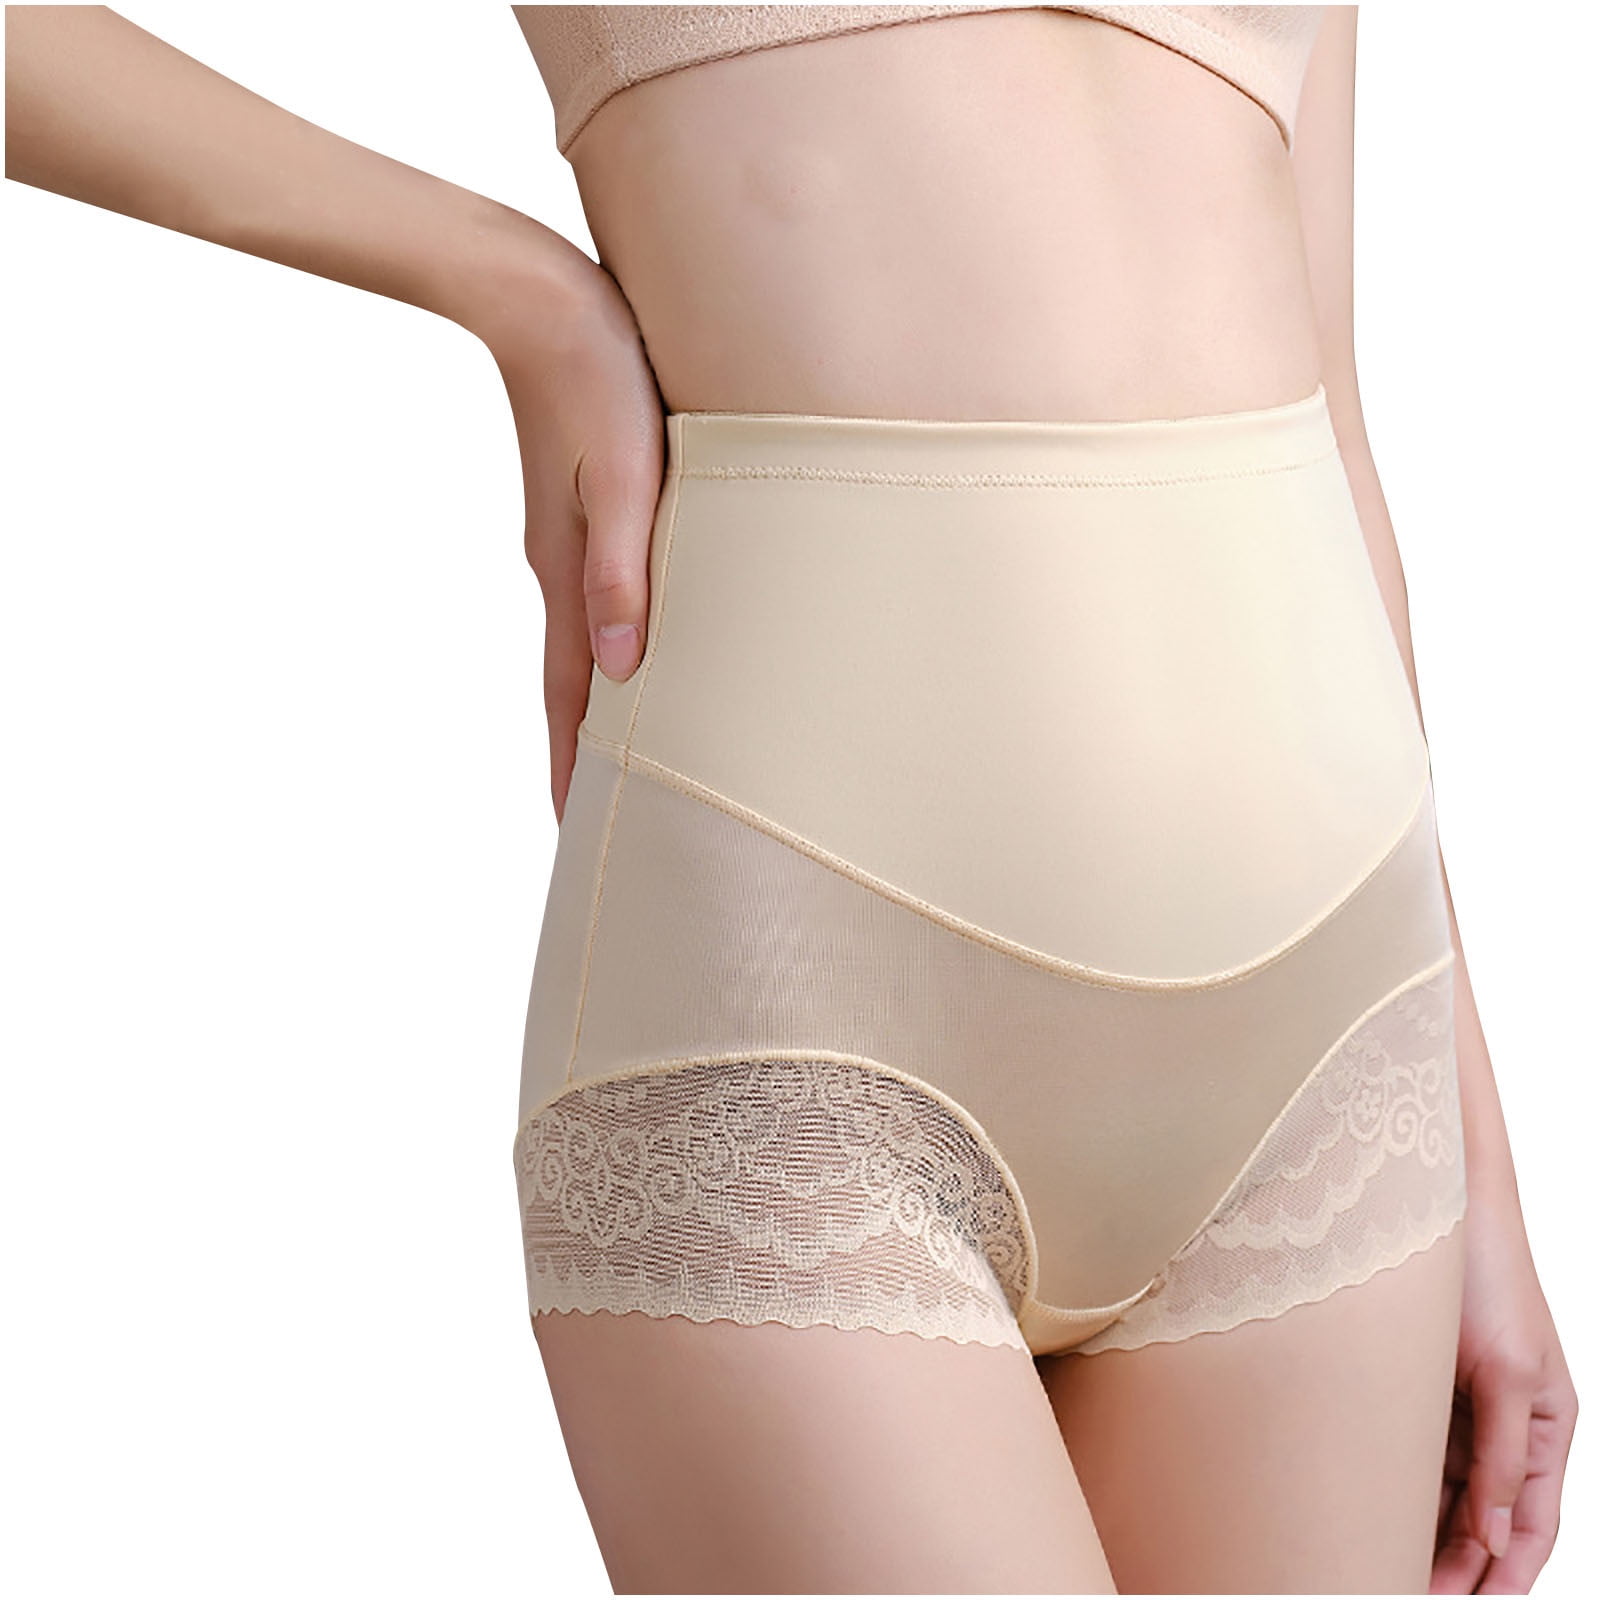 Women Body Shaper Lace Knickers Tummy Control Panties High Waist Safety  Shorts